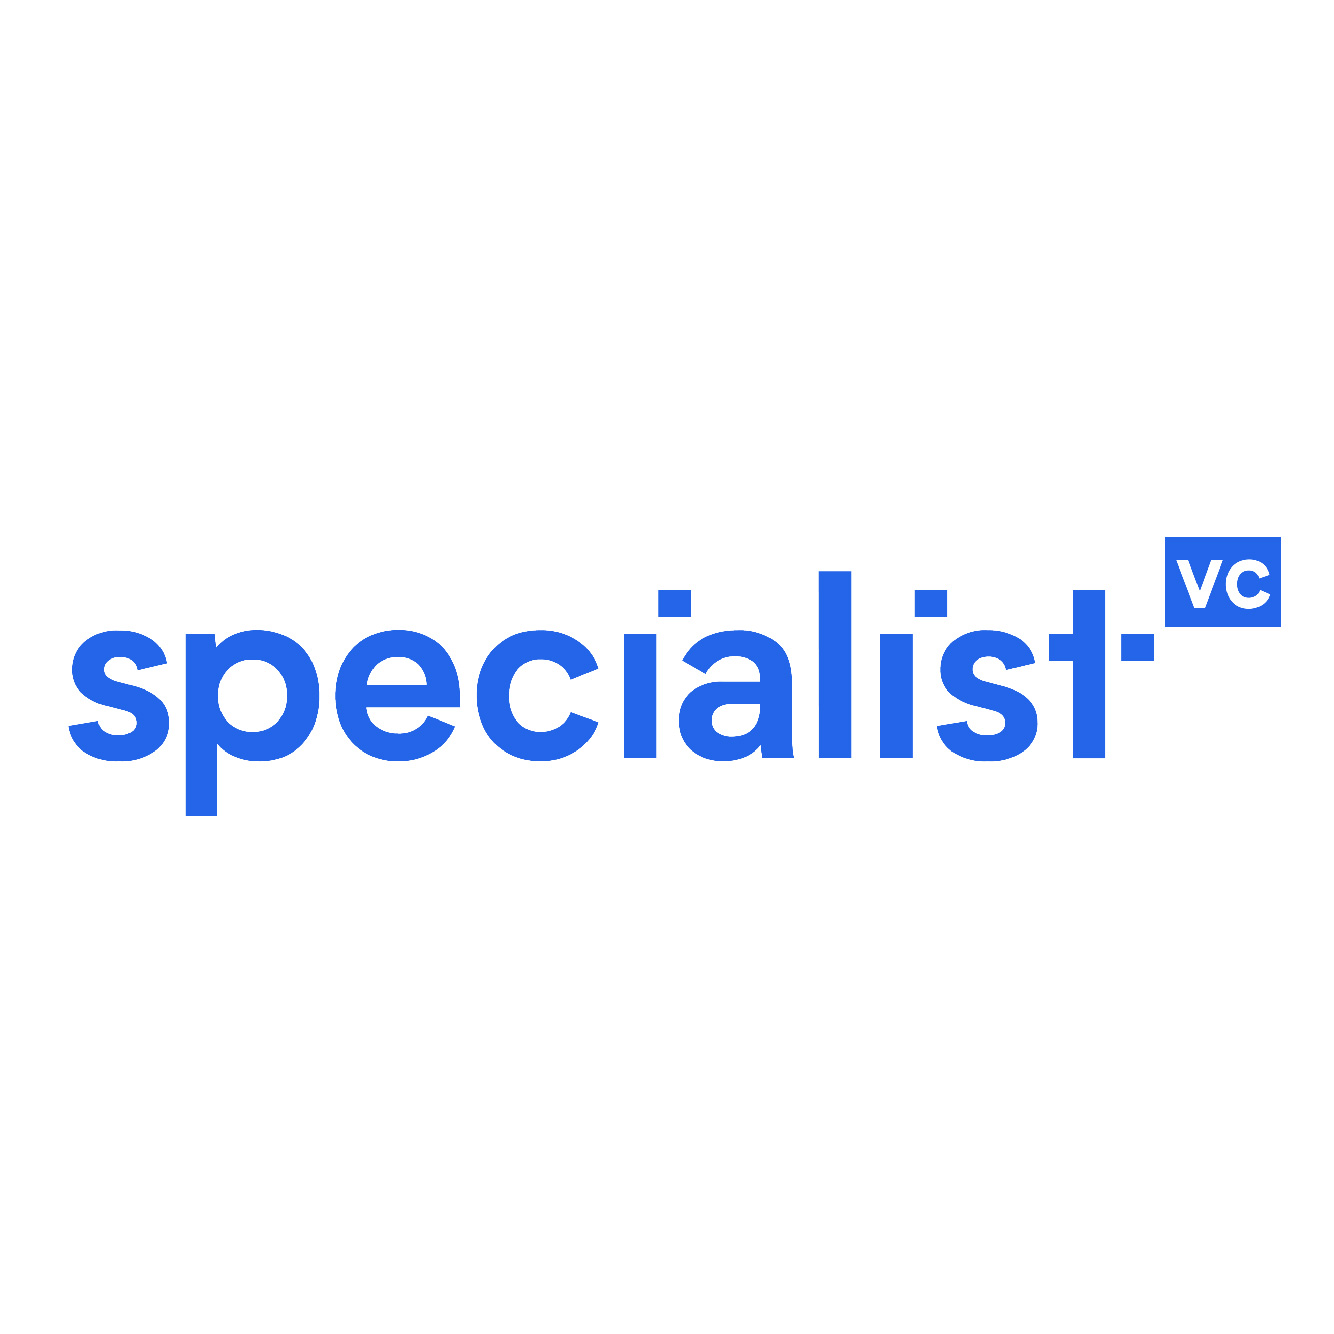 logo for Specialist Vc